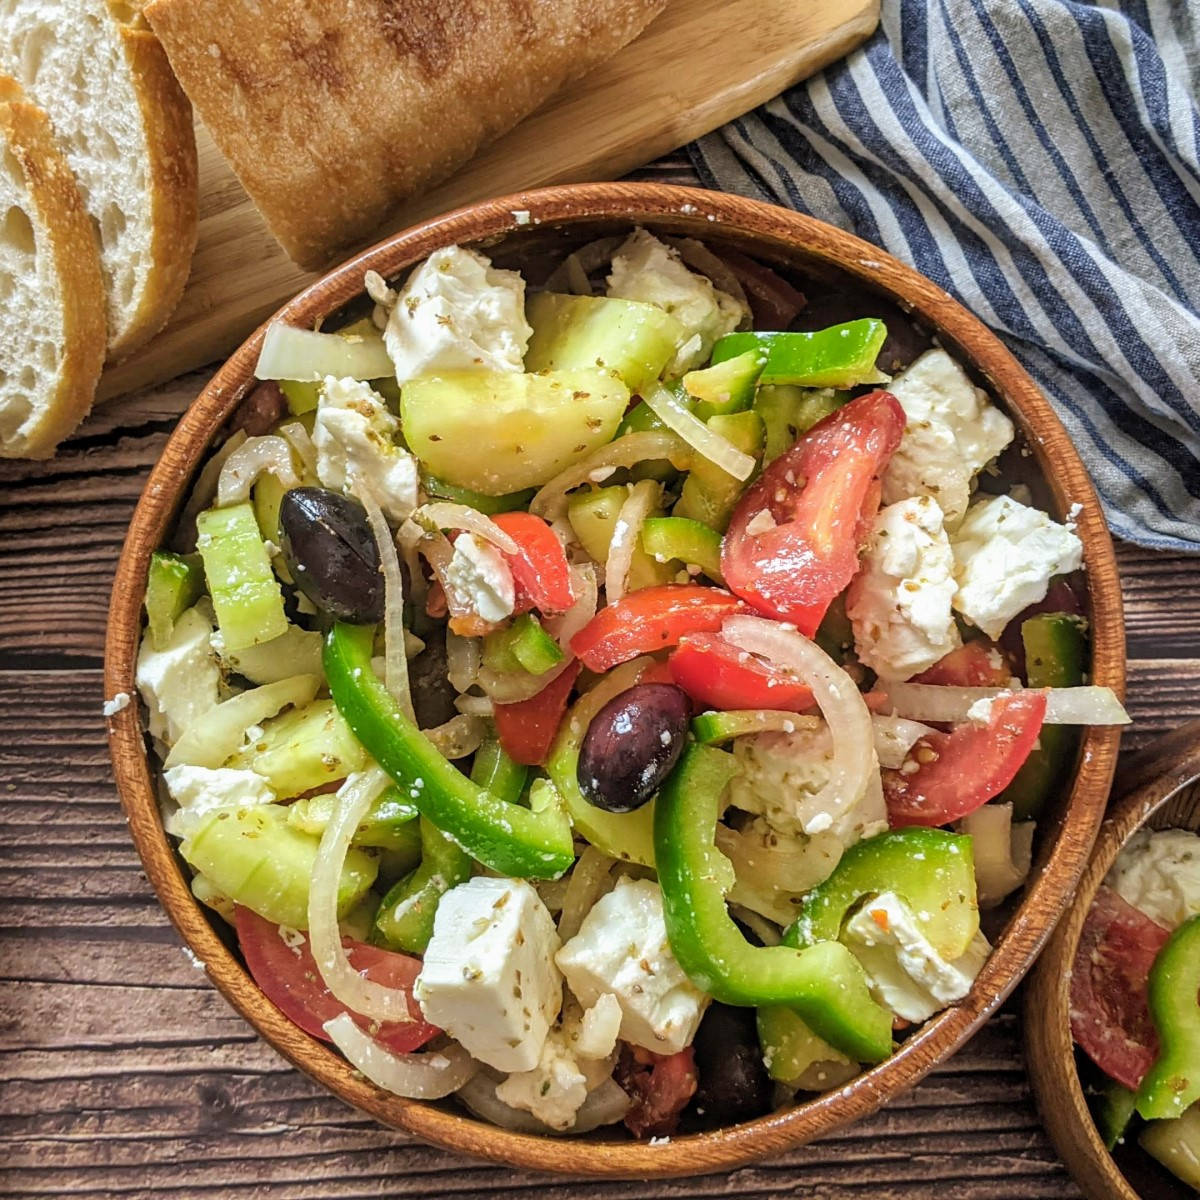 Greek Salad served in wooden bowl next to a loaf of bread